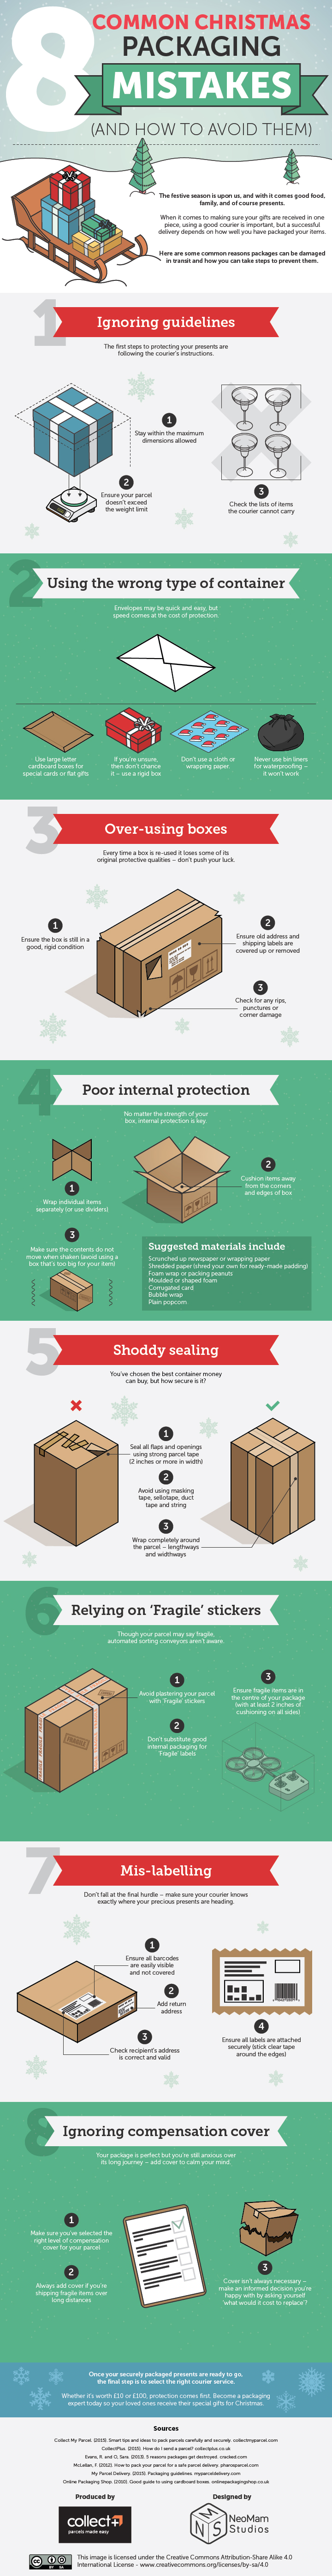 8 Common Packaging Mistakes